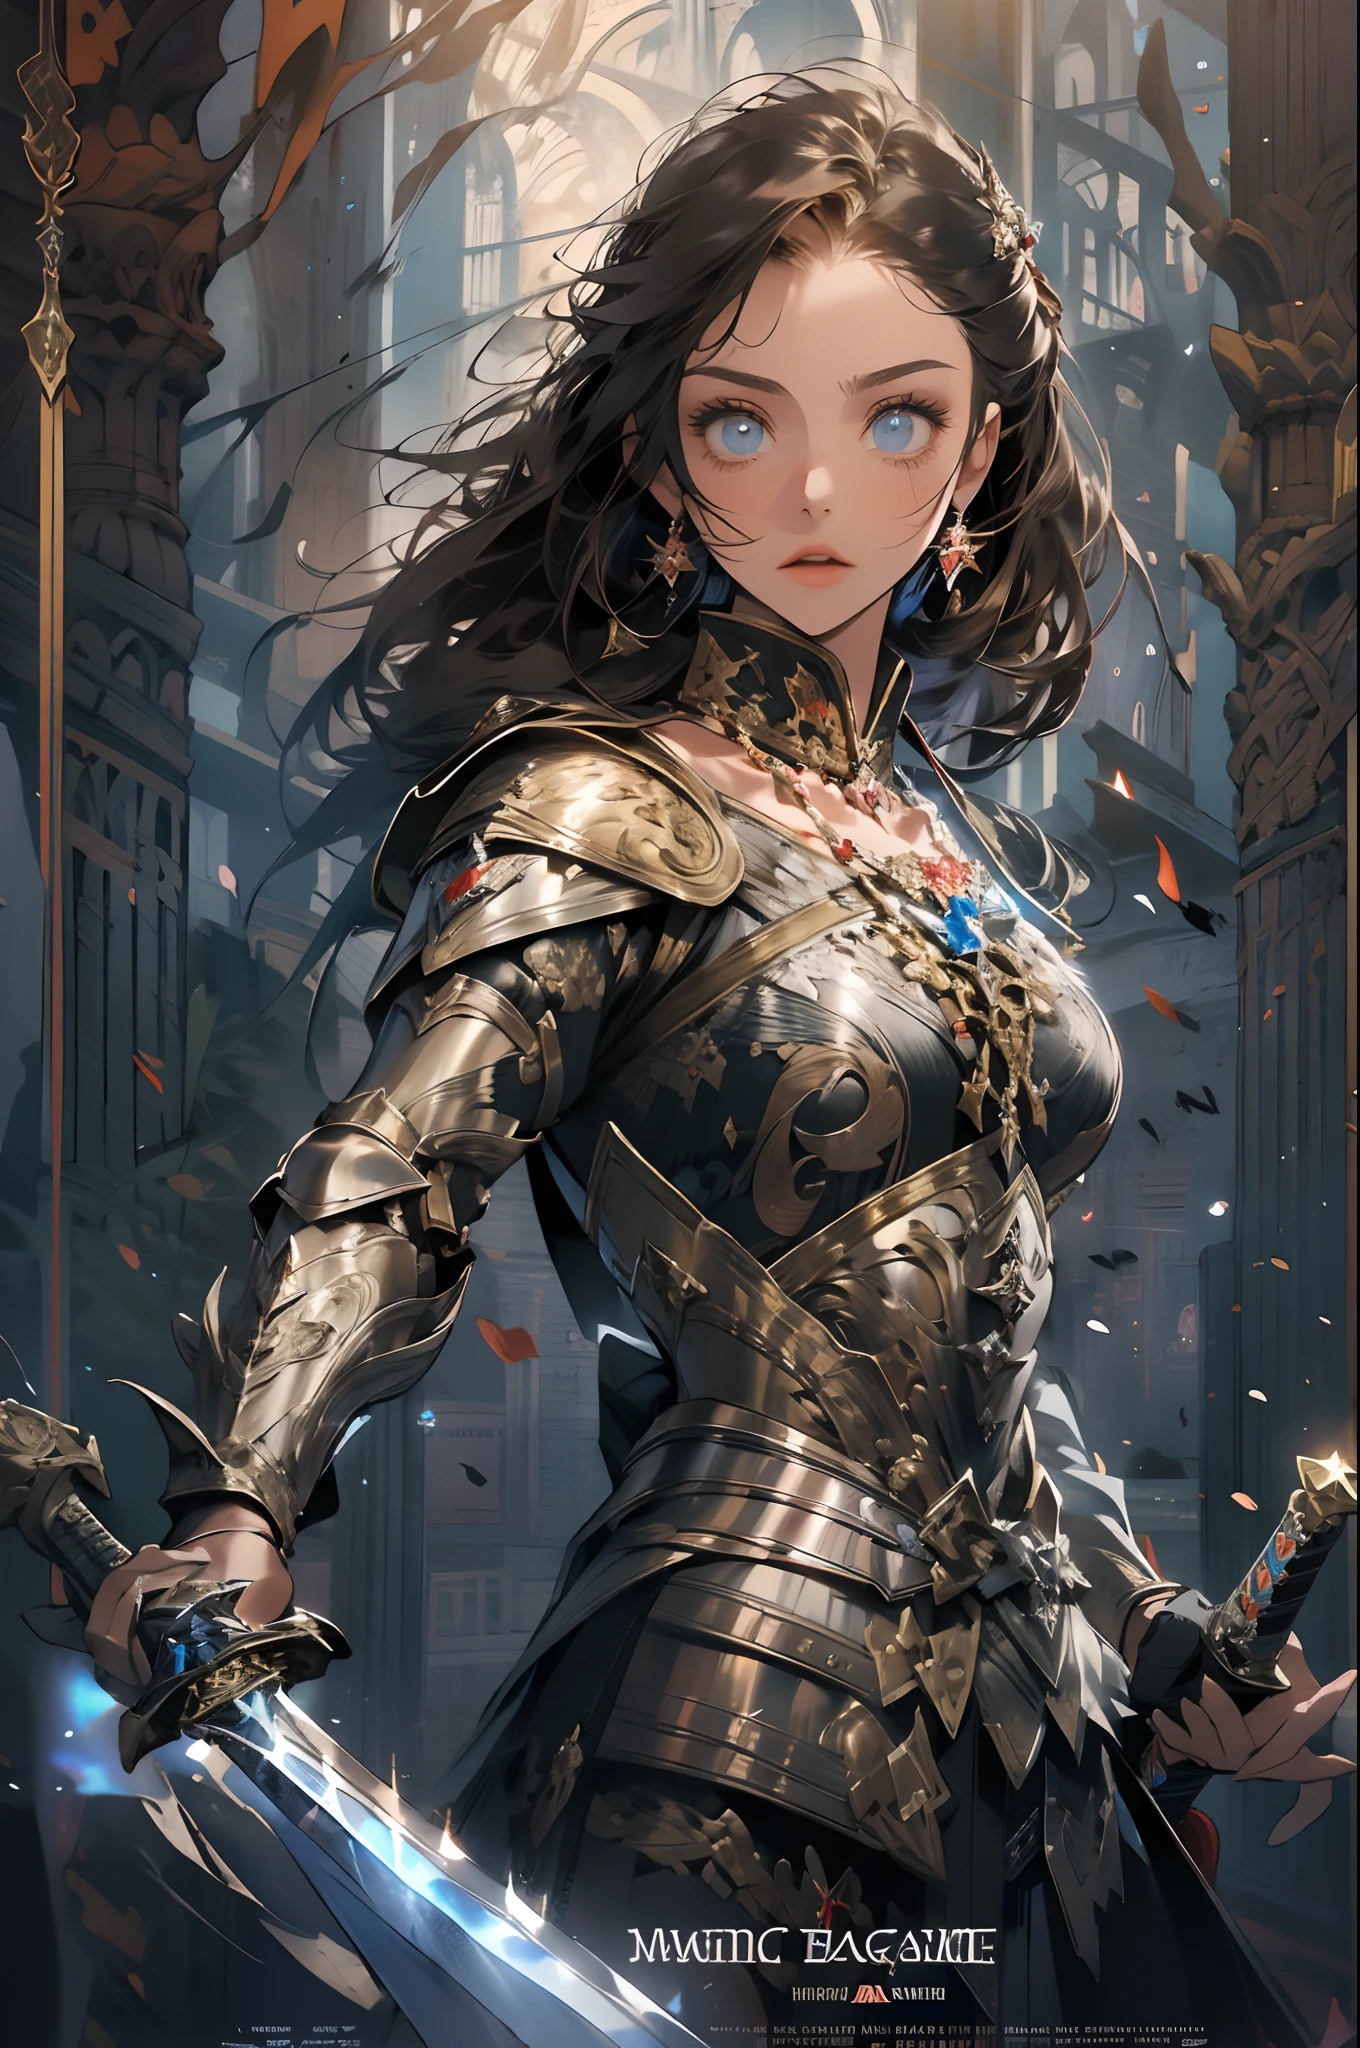 fantasy, epic, movie poster-style illustration, a girl standing in armor, wielding a sword, with a dynamic and magical background, featuring prominent and well-designed typography elements,standing, confident, determined, wielding a sword, epic title, magical forest, glowing runes, bold text